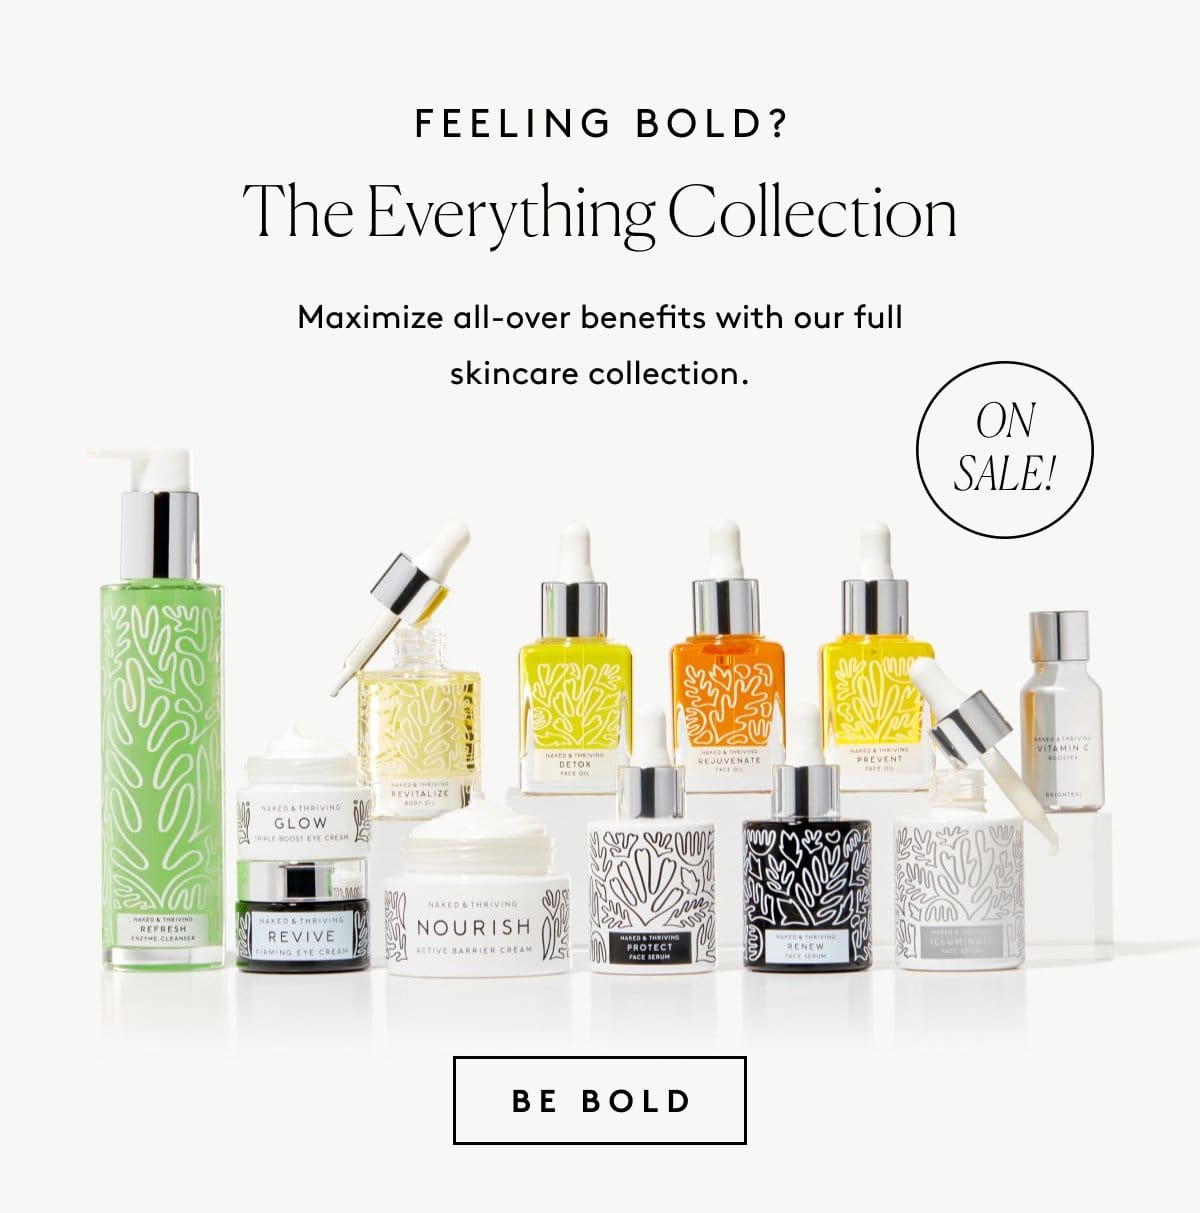 The Everything Collection